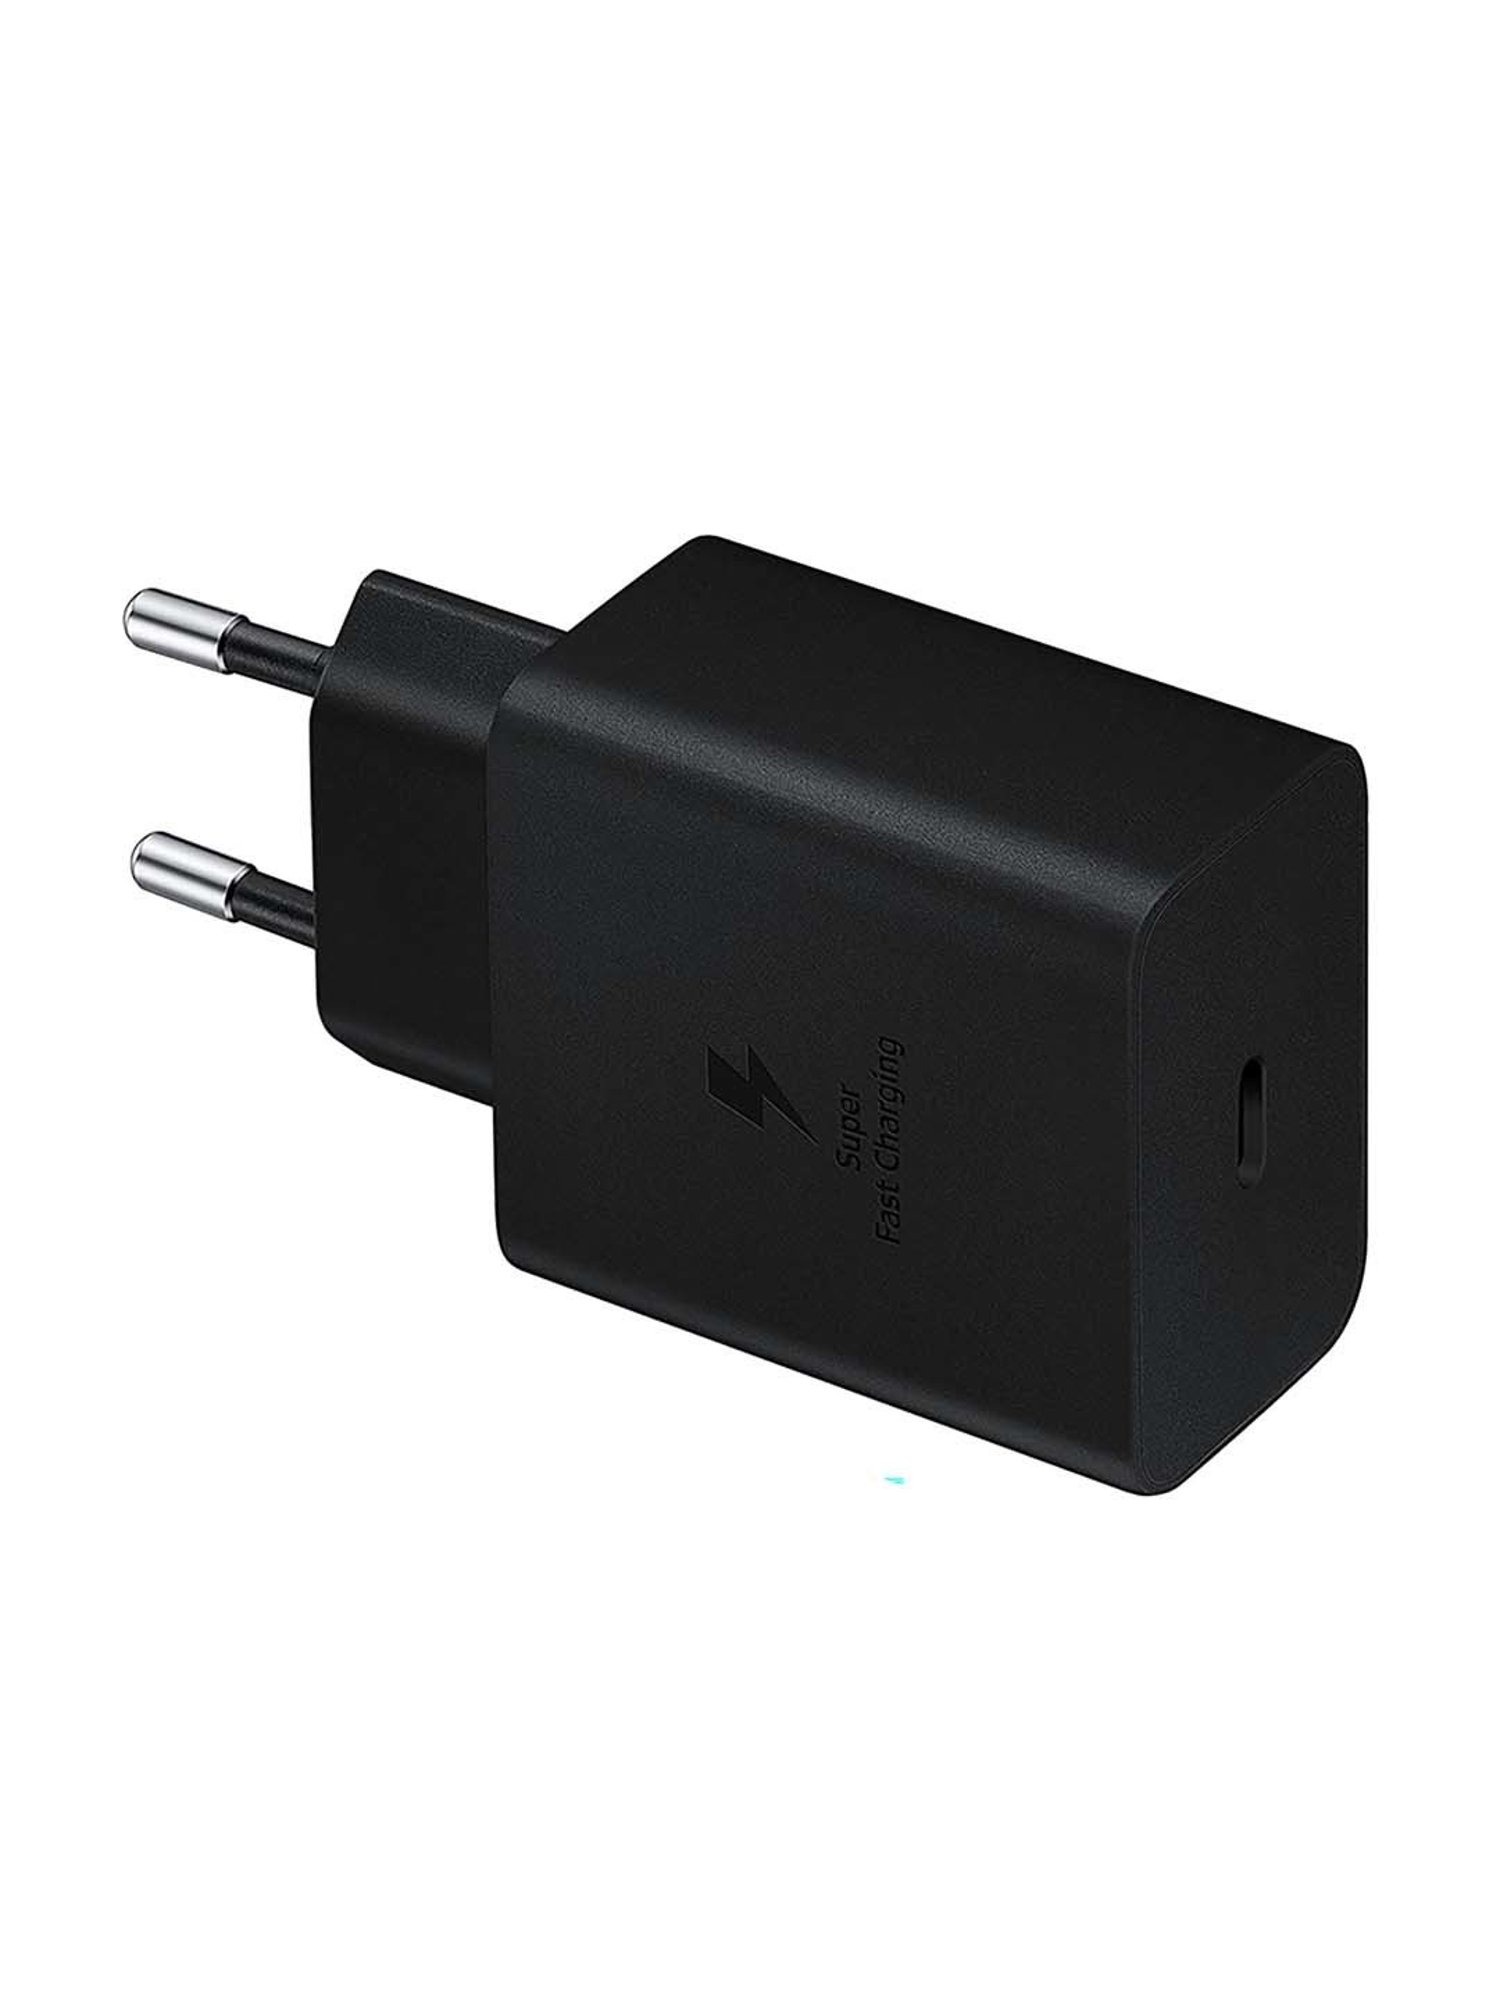 45W PD Power Adapter T4510 (With 5A USB-C to USB-C cable)) Black